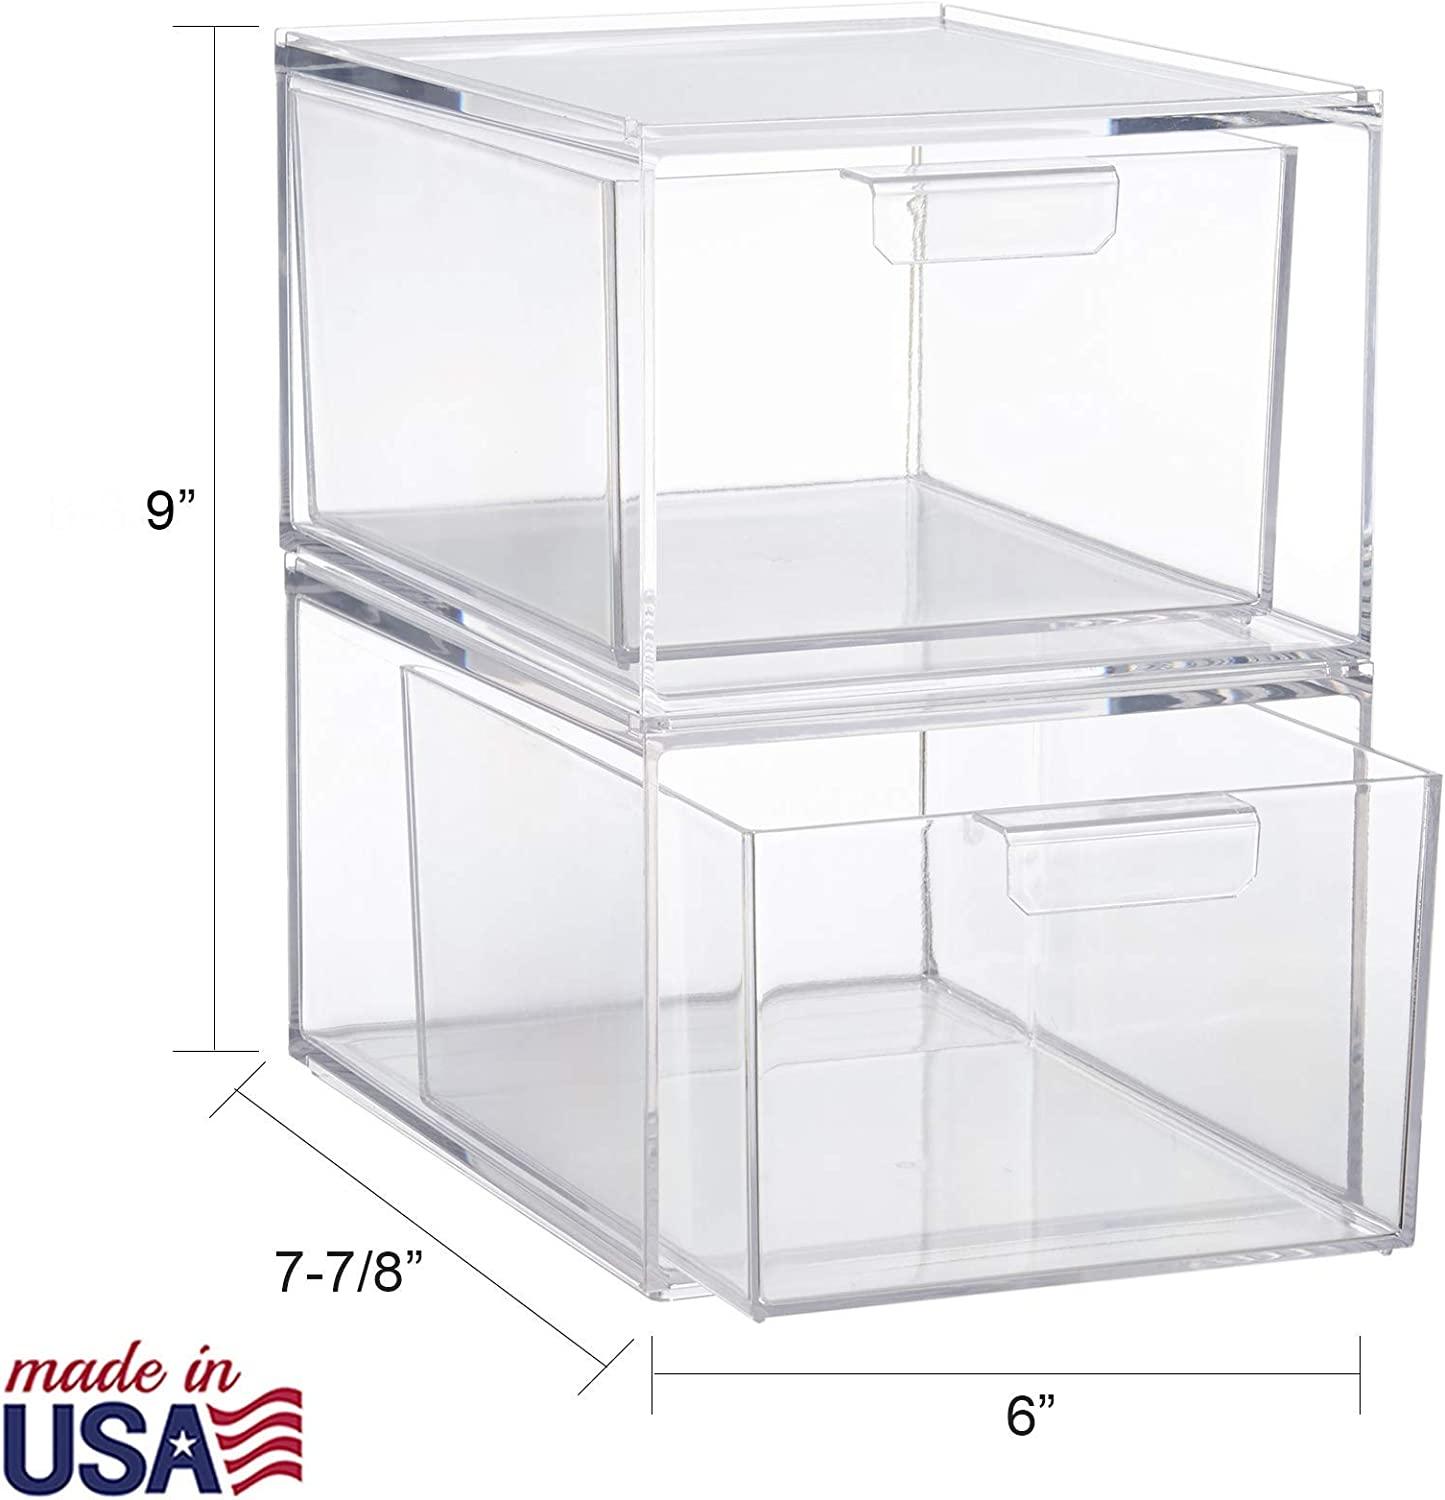  STORi Sofia Plastic Stackable Organizers Drawers (Set of 2)  Clear Drawers for Makeup, 12.5-inches Wide, Set Includes One Open Drawer  & One 3-compartment Drawer